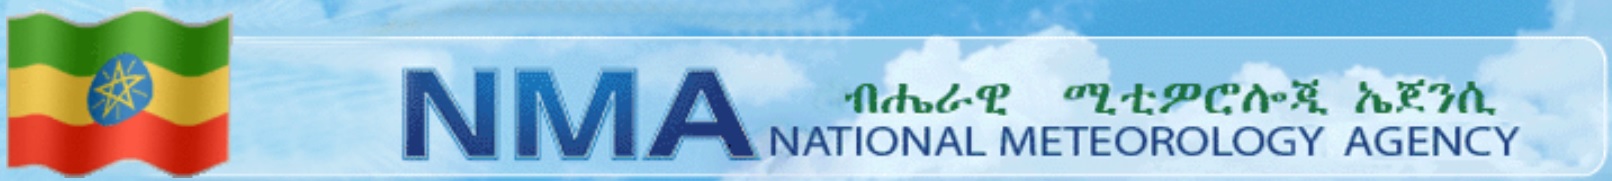 Logo of the National Meteorology Agency of Ethiopia: blue sky with clouds background, with on the left the Ethiopian flag and on the right the acronym NMA, next to it spelled out National Meteorology Agency